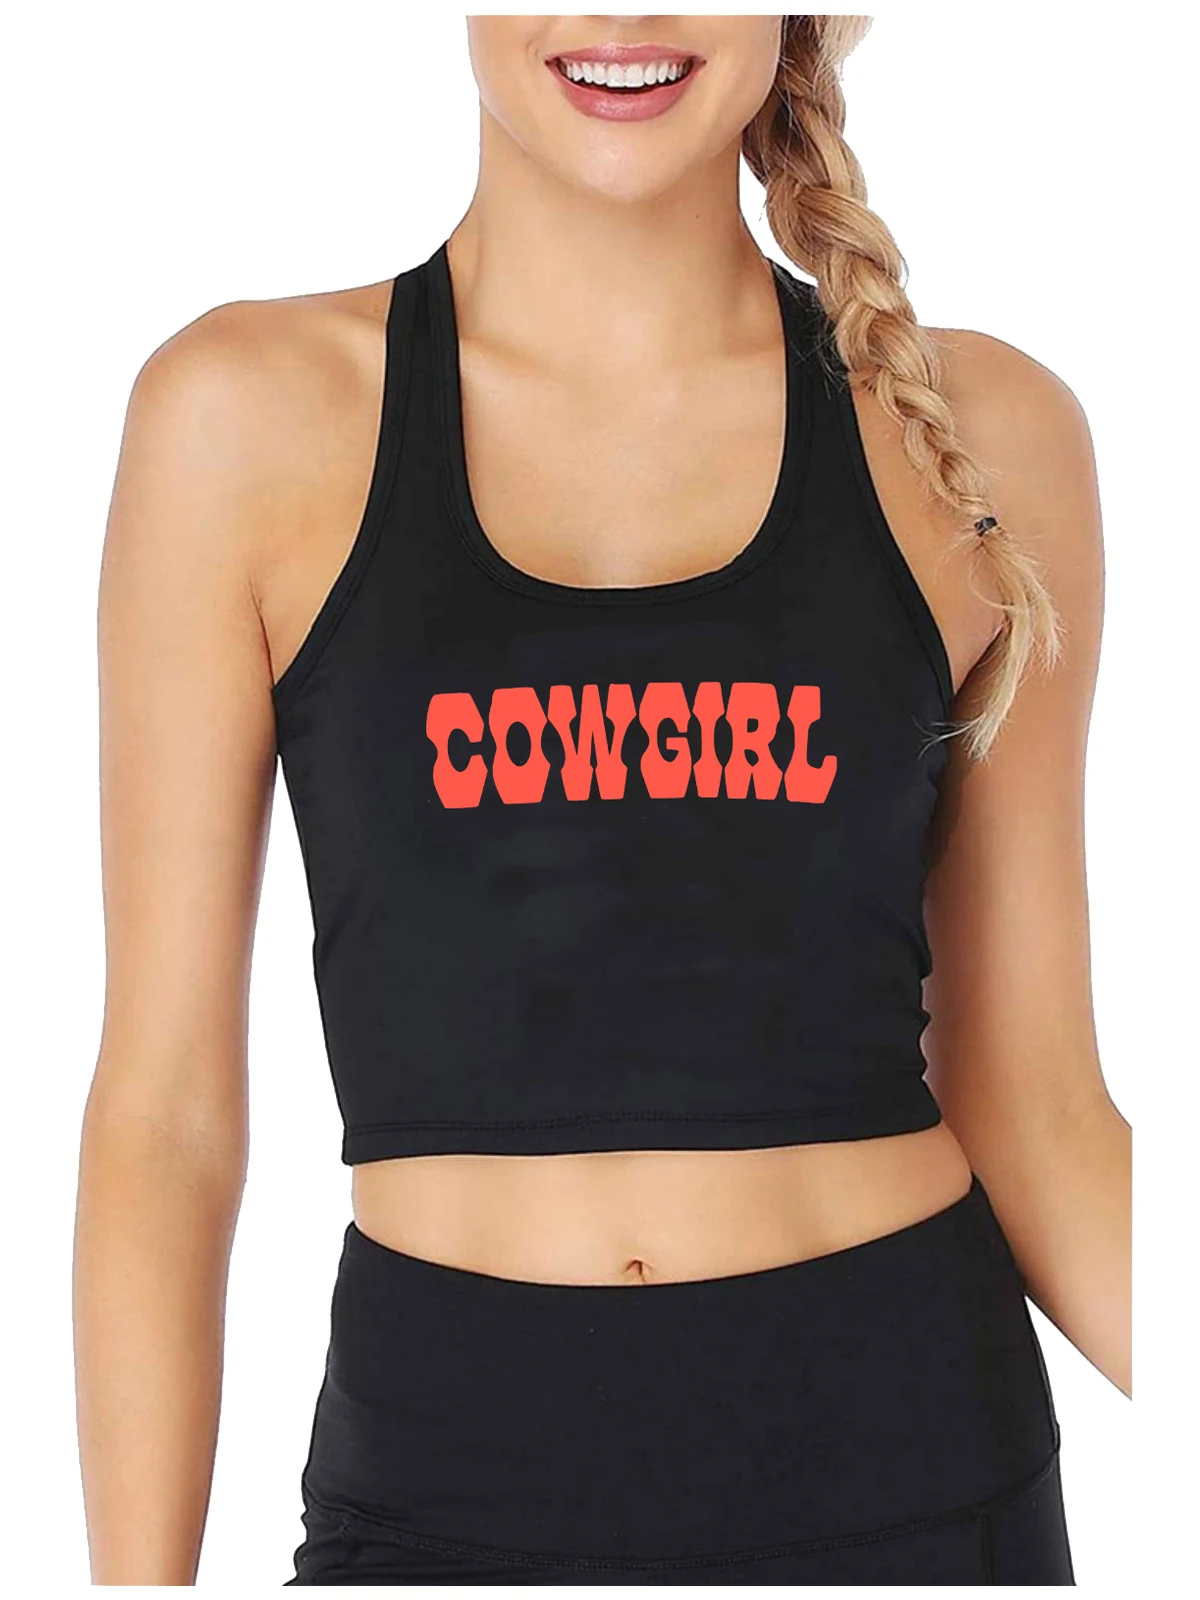 

Western Cowgirl Y2K Design Cotton Sexy Slim Fit Crop Top Hot Girl Fashion Creative Naughty Tank Tops Sports Training Camisole